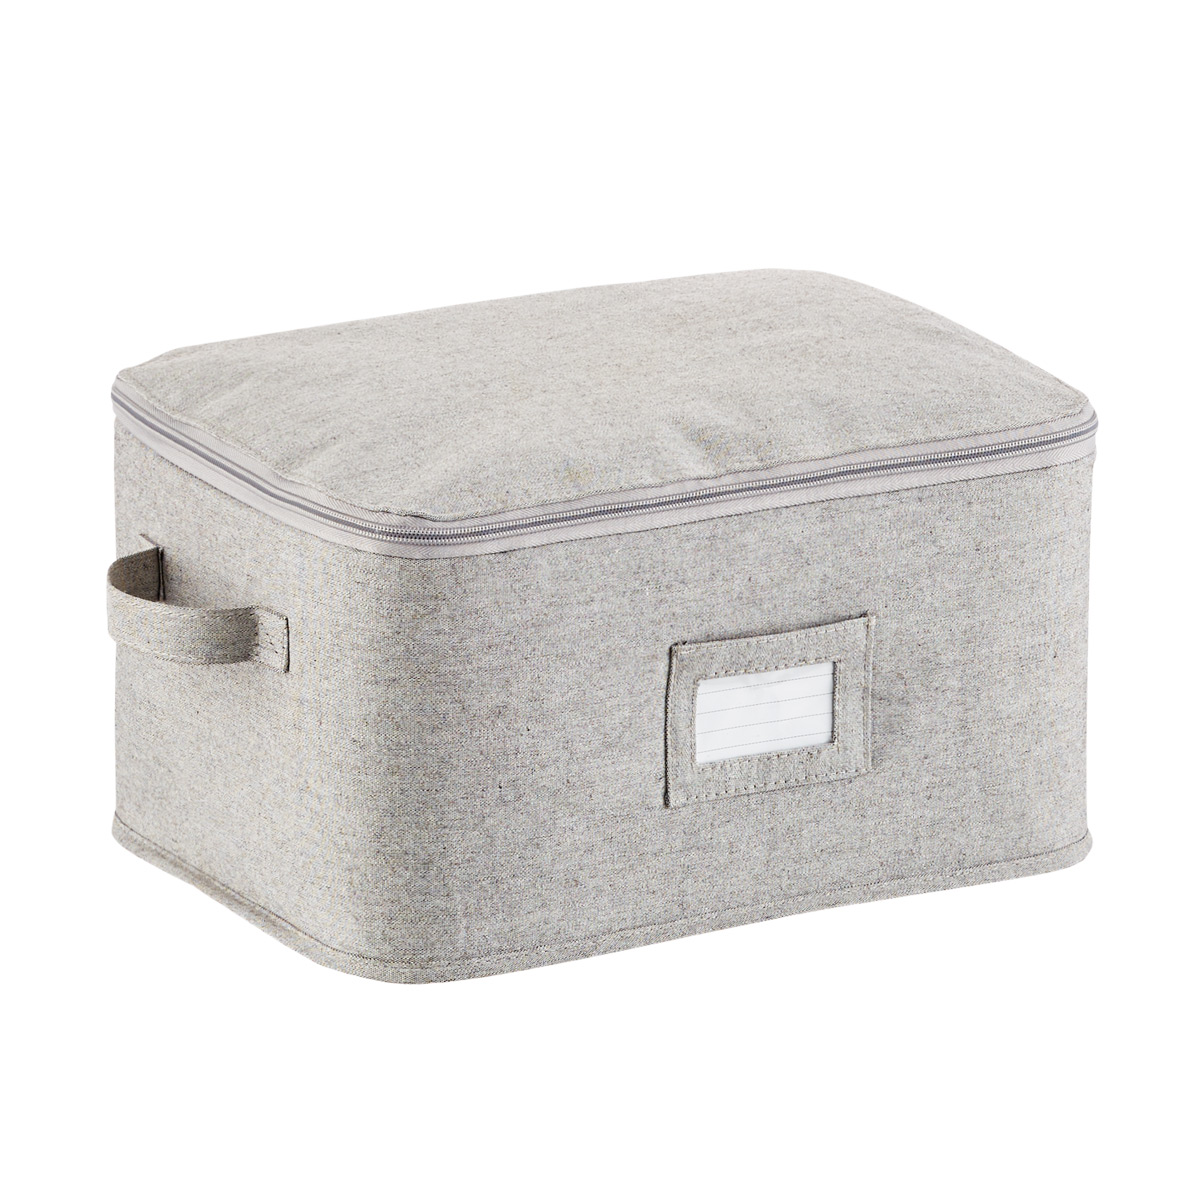 The Container Store Large Zippered Storage Bag Grey, 24 x 18 x 15 H